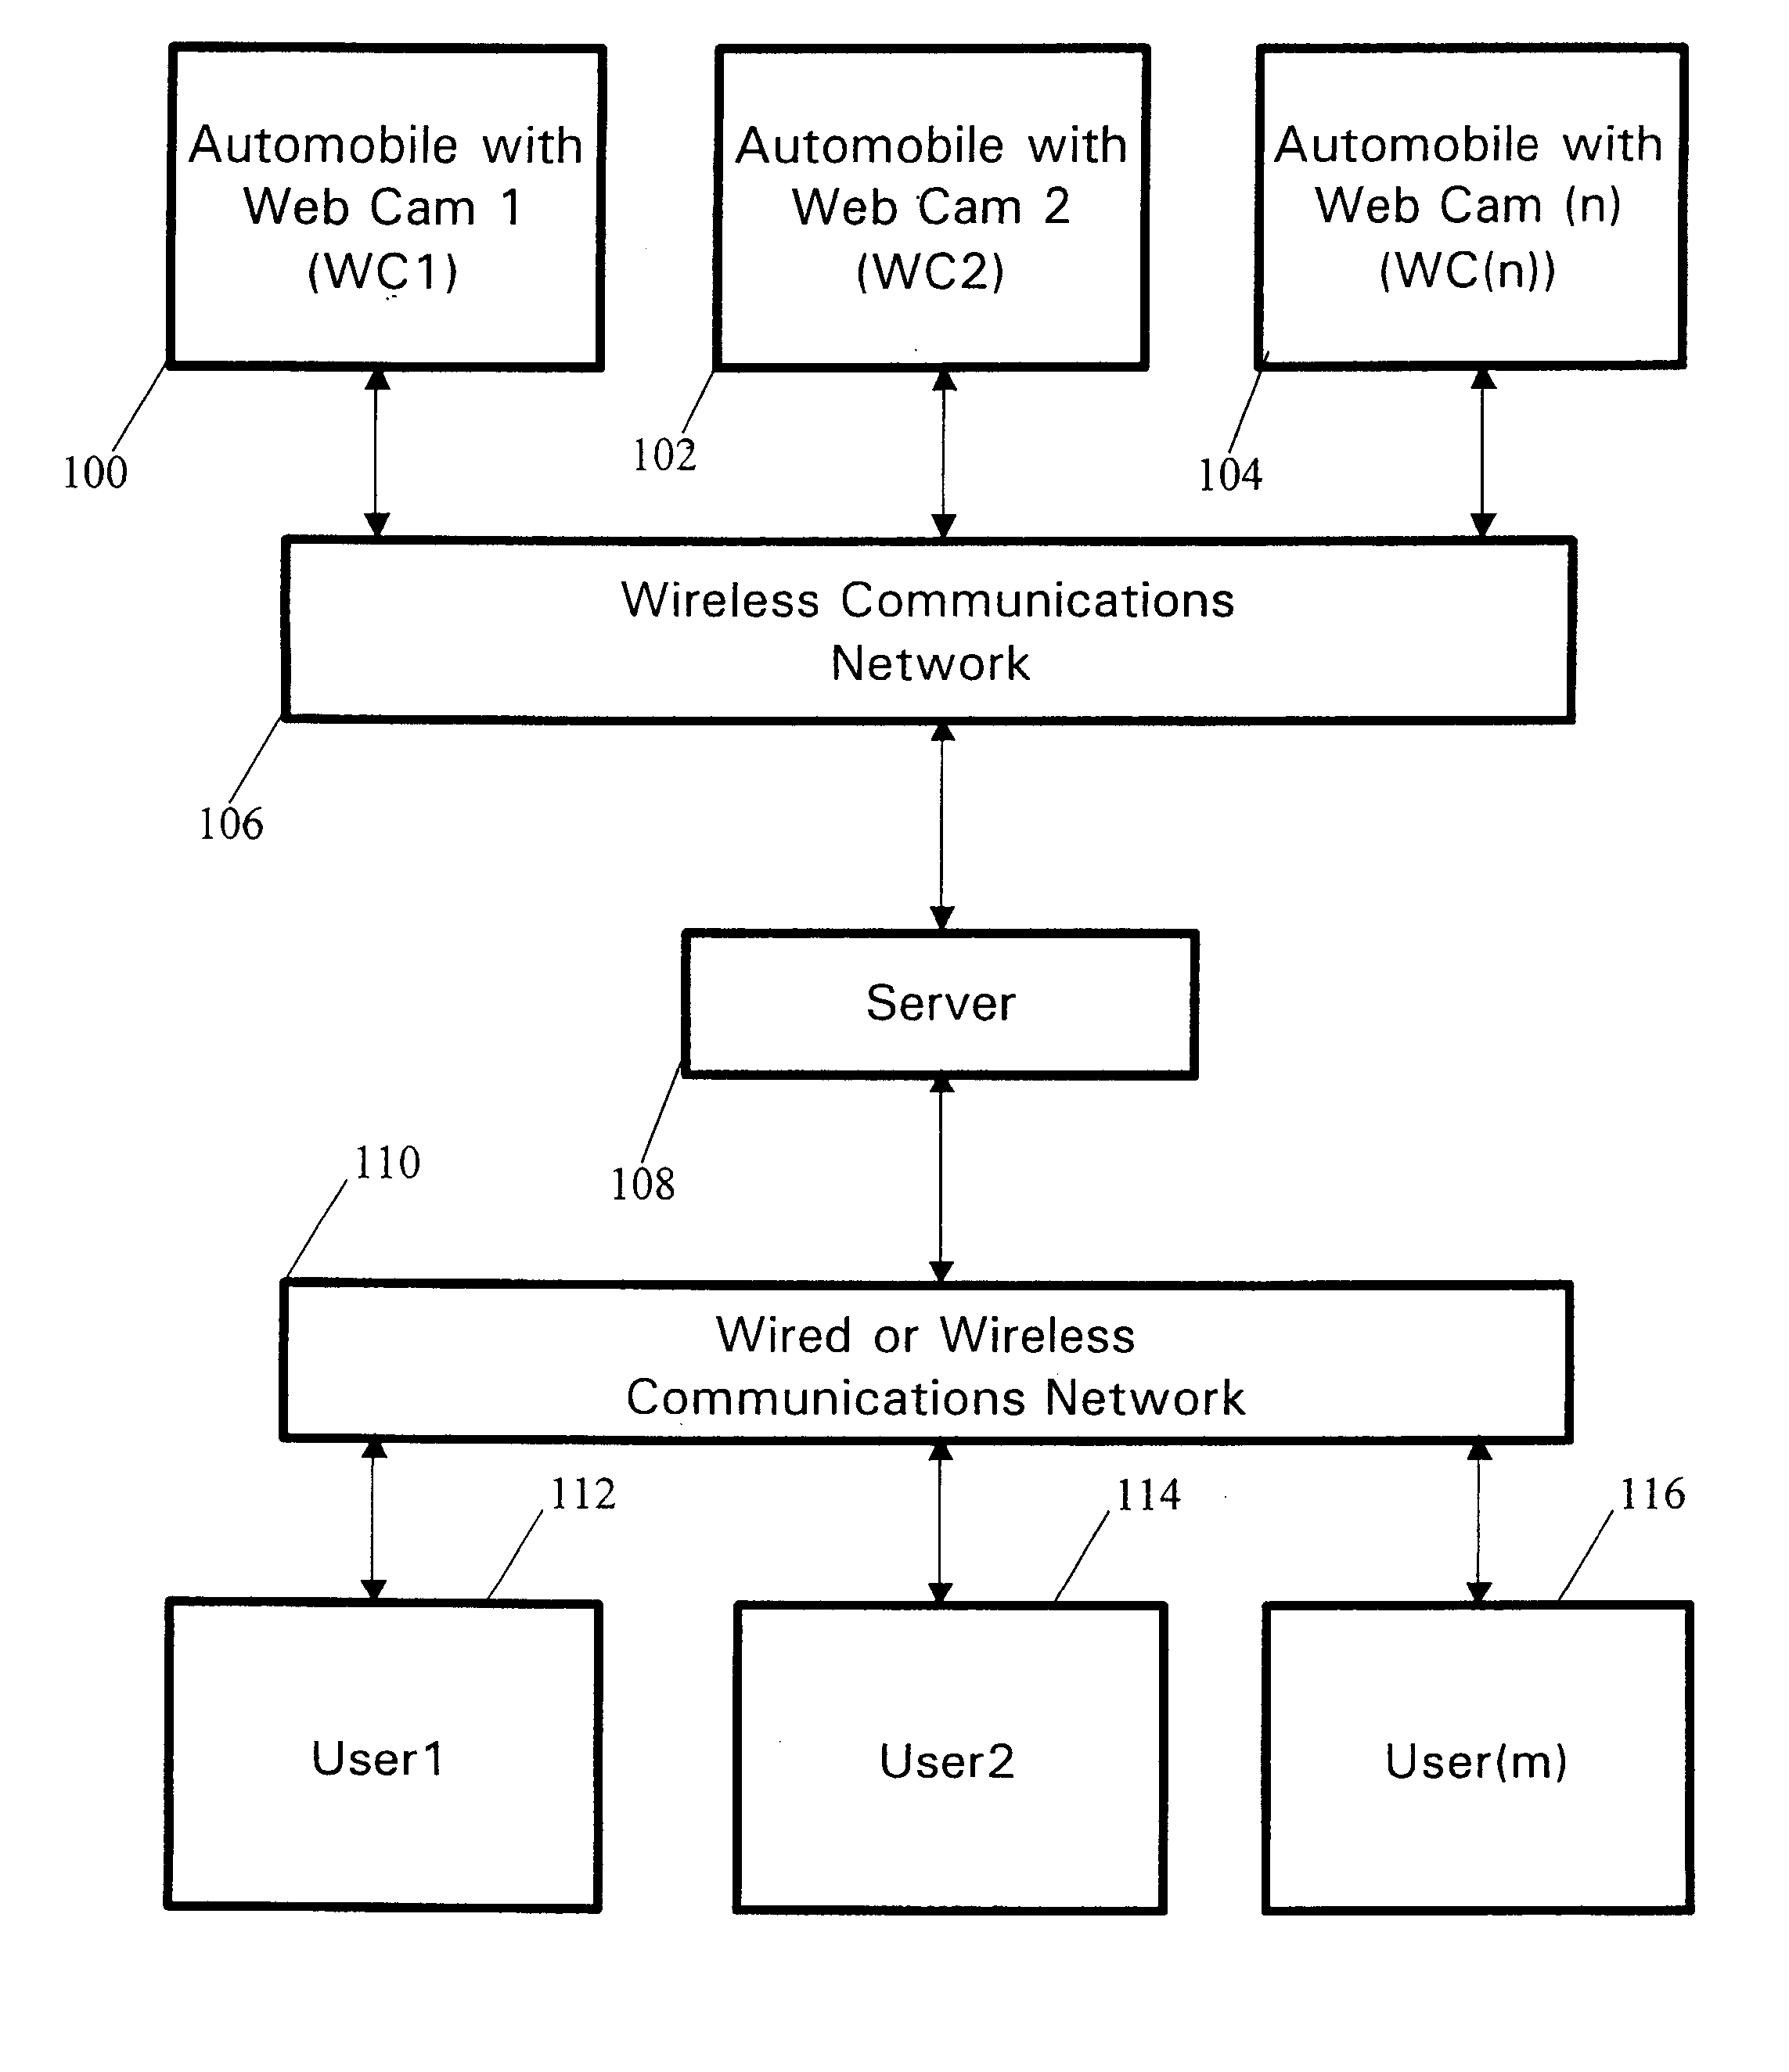 Automobile web cam and communications system incorporating a network of automobile web cams